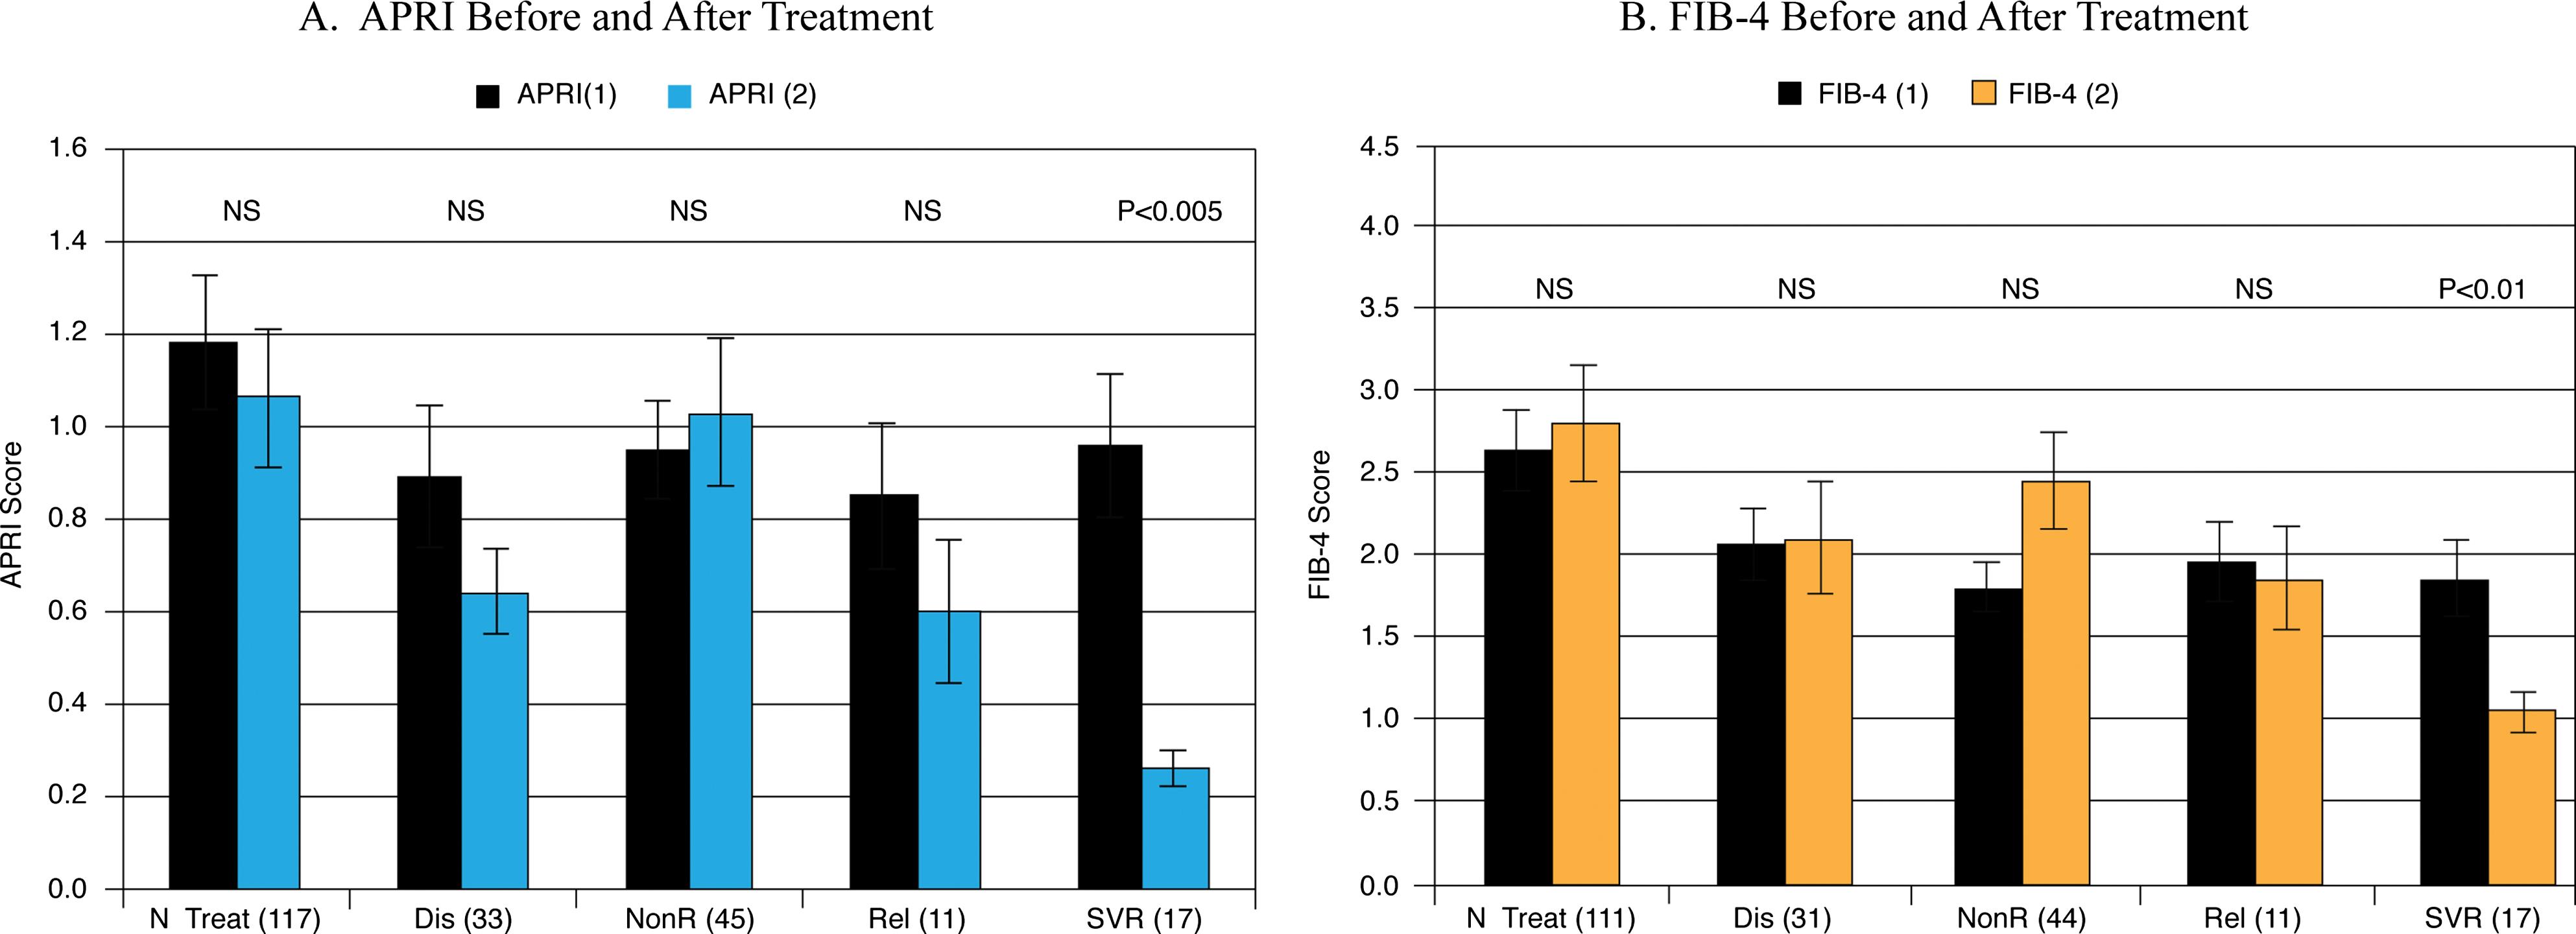 Fibrosis changes in treated vs. nontreated patients defined by APRI and FIB-4.